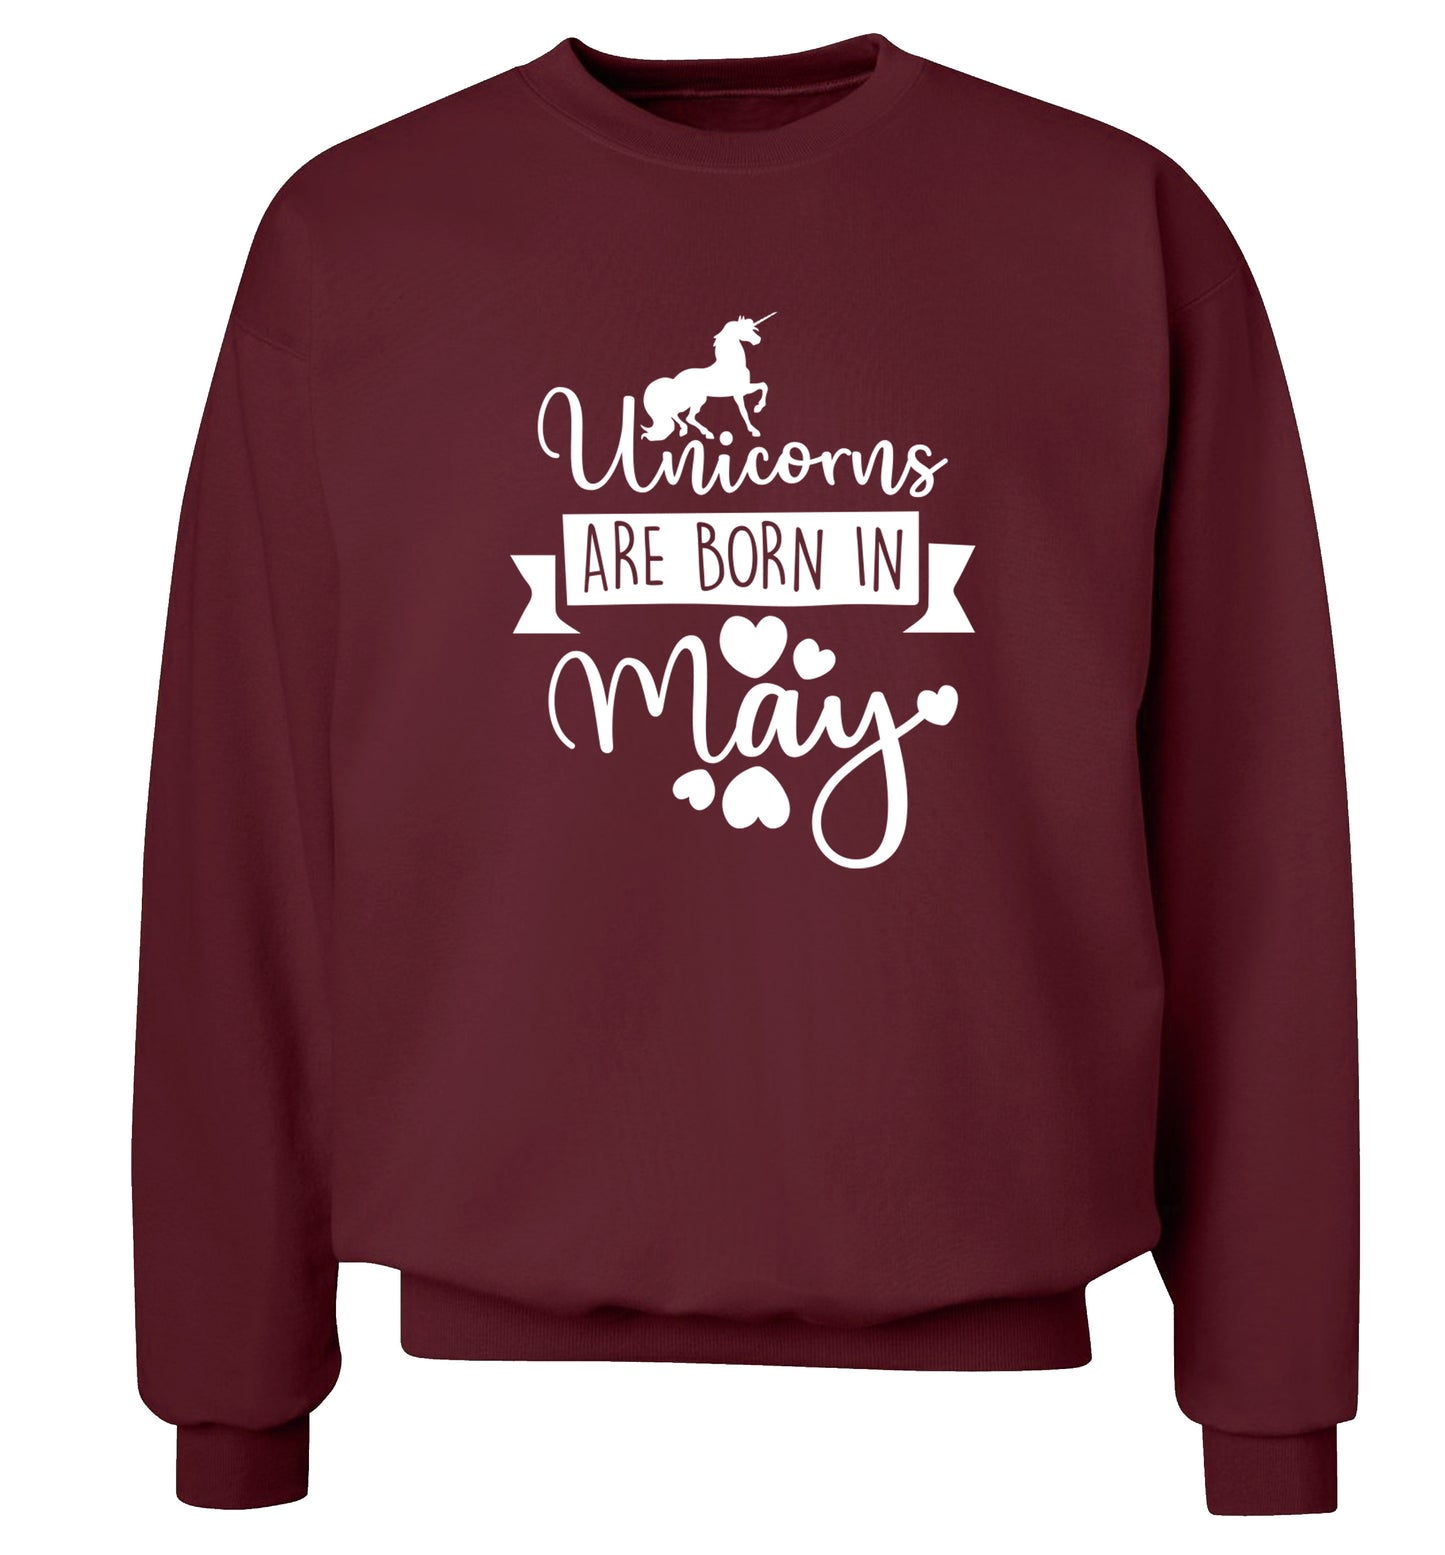 Unicorns are born in May Adult's unisex maroon Sweater 2XL